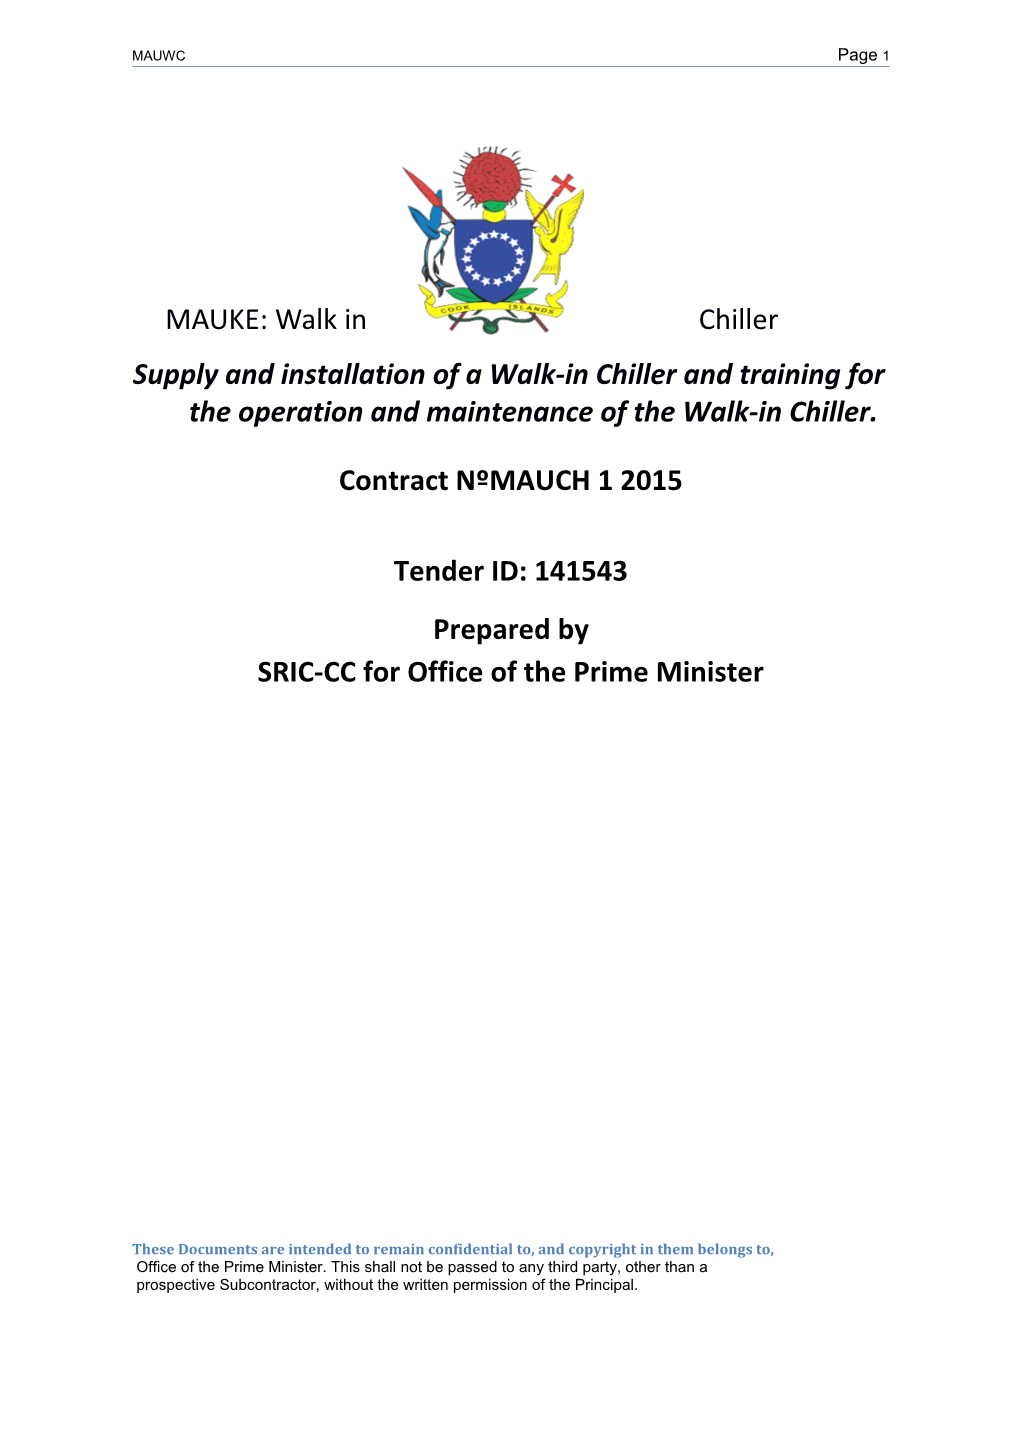 SRIC-CC for Office of the Prime Minister